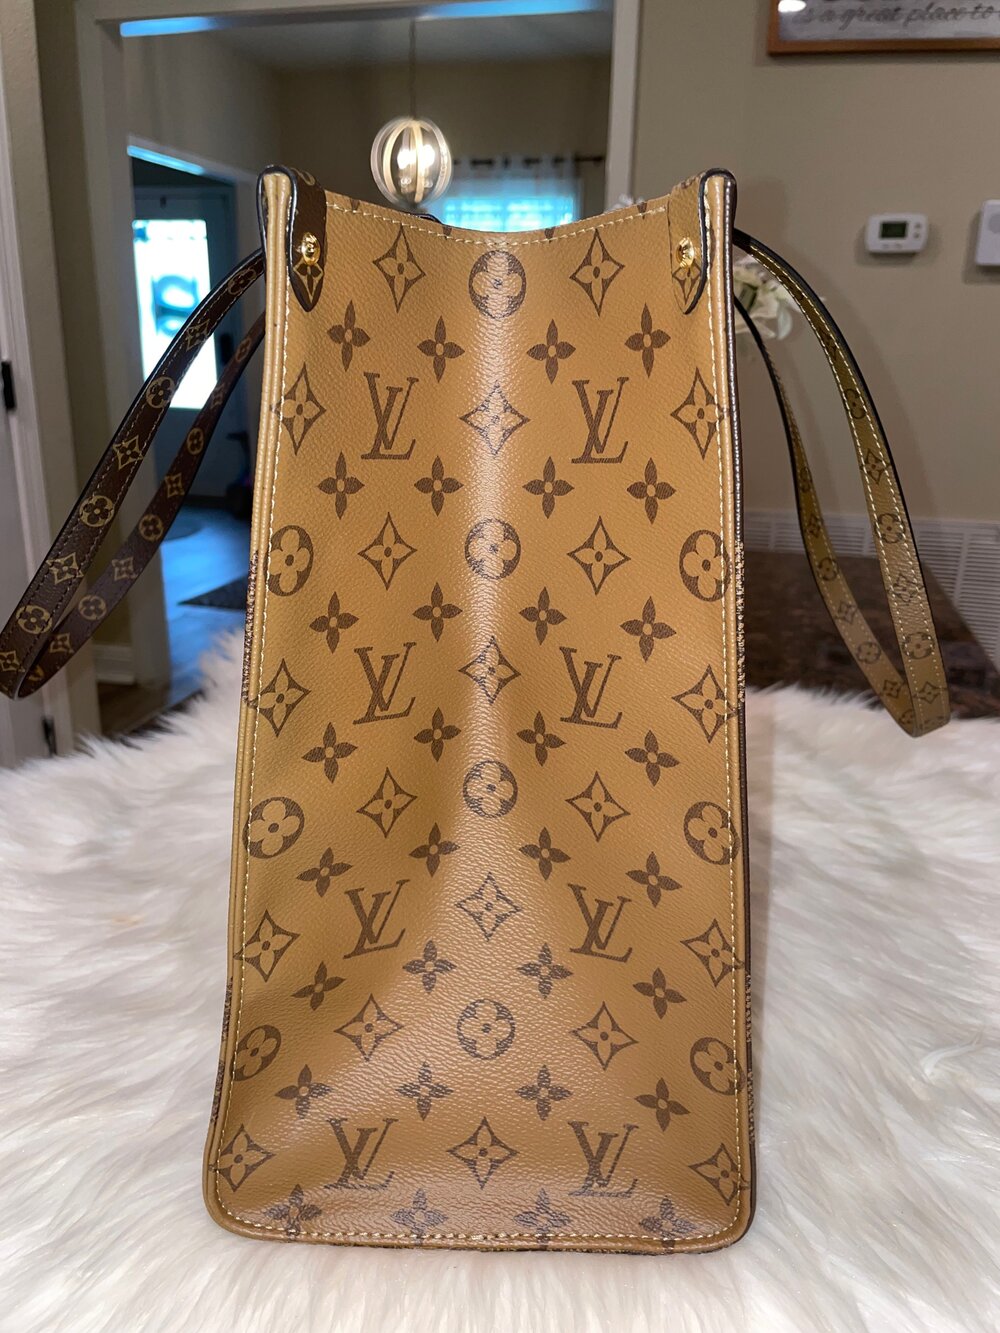 Onthego GM, Used & Preloved Louis Vuitton Tote Bag, LXR Canada, Black